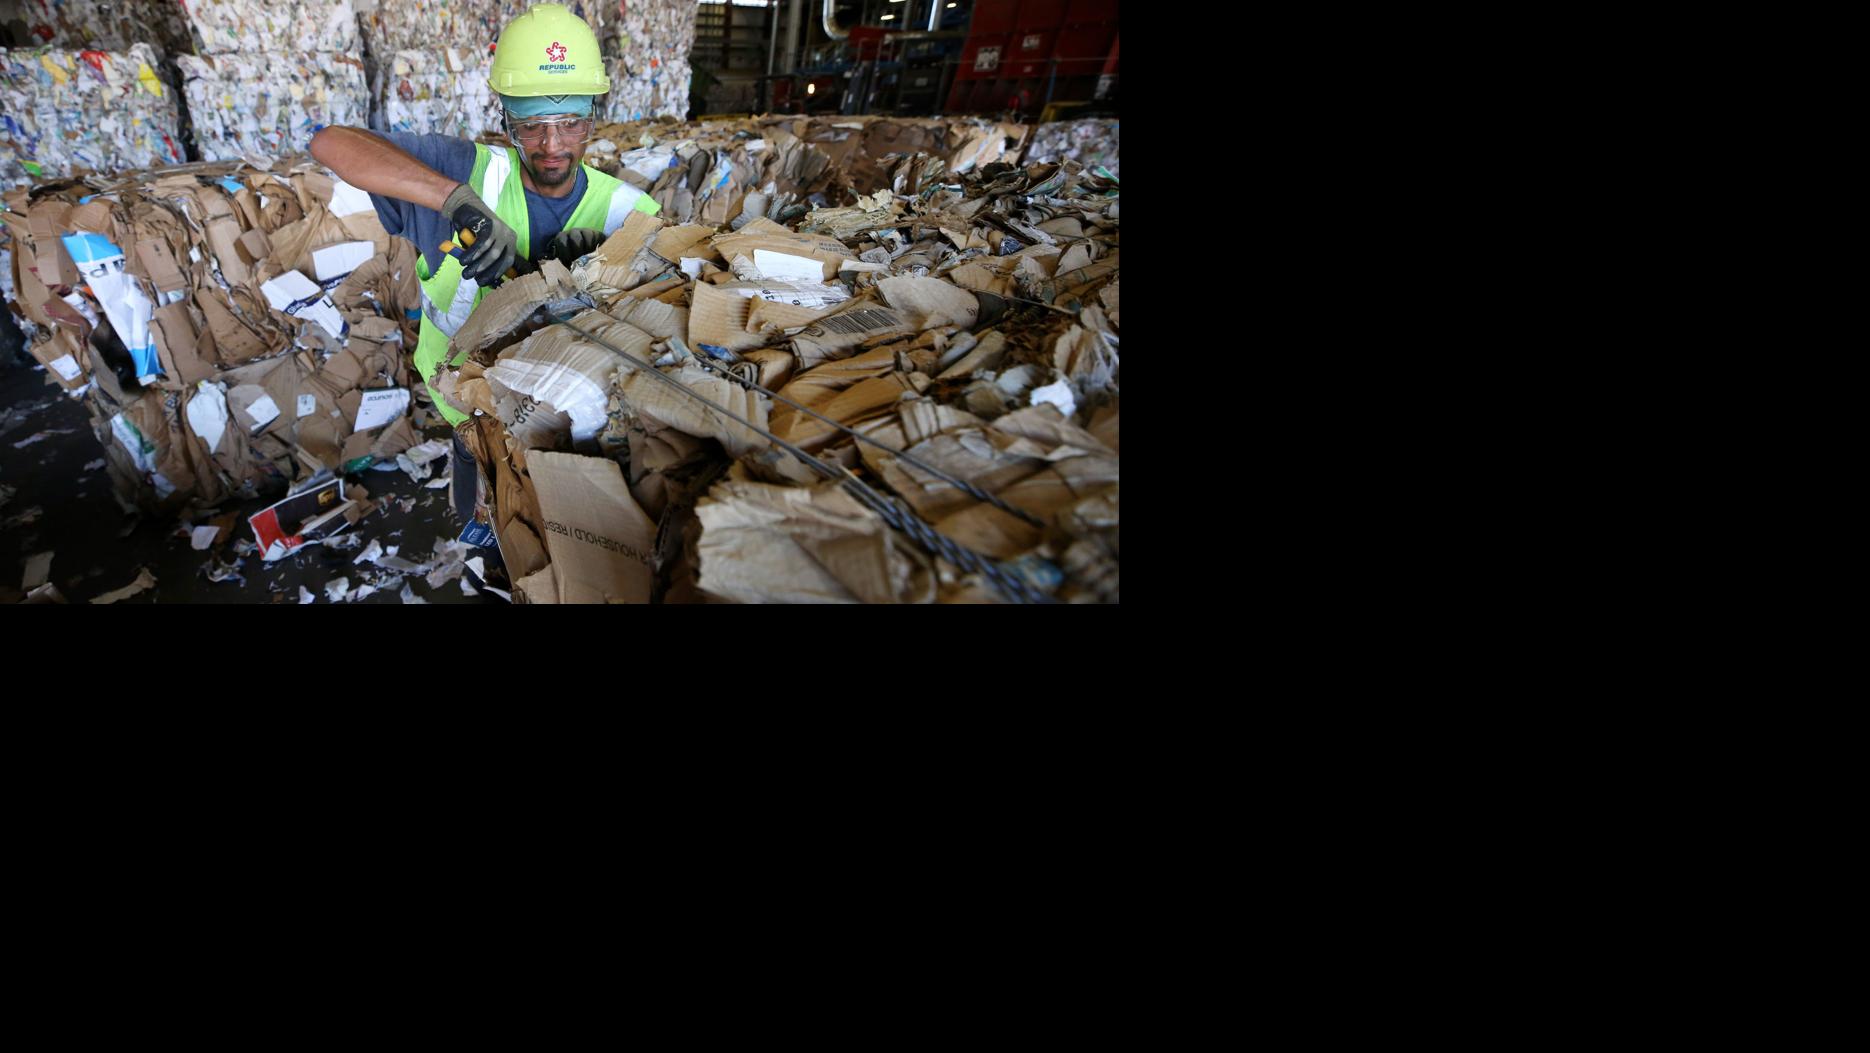 Three Headaches for the Recycling Industry - The New York Times